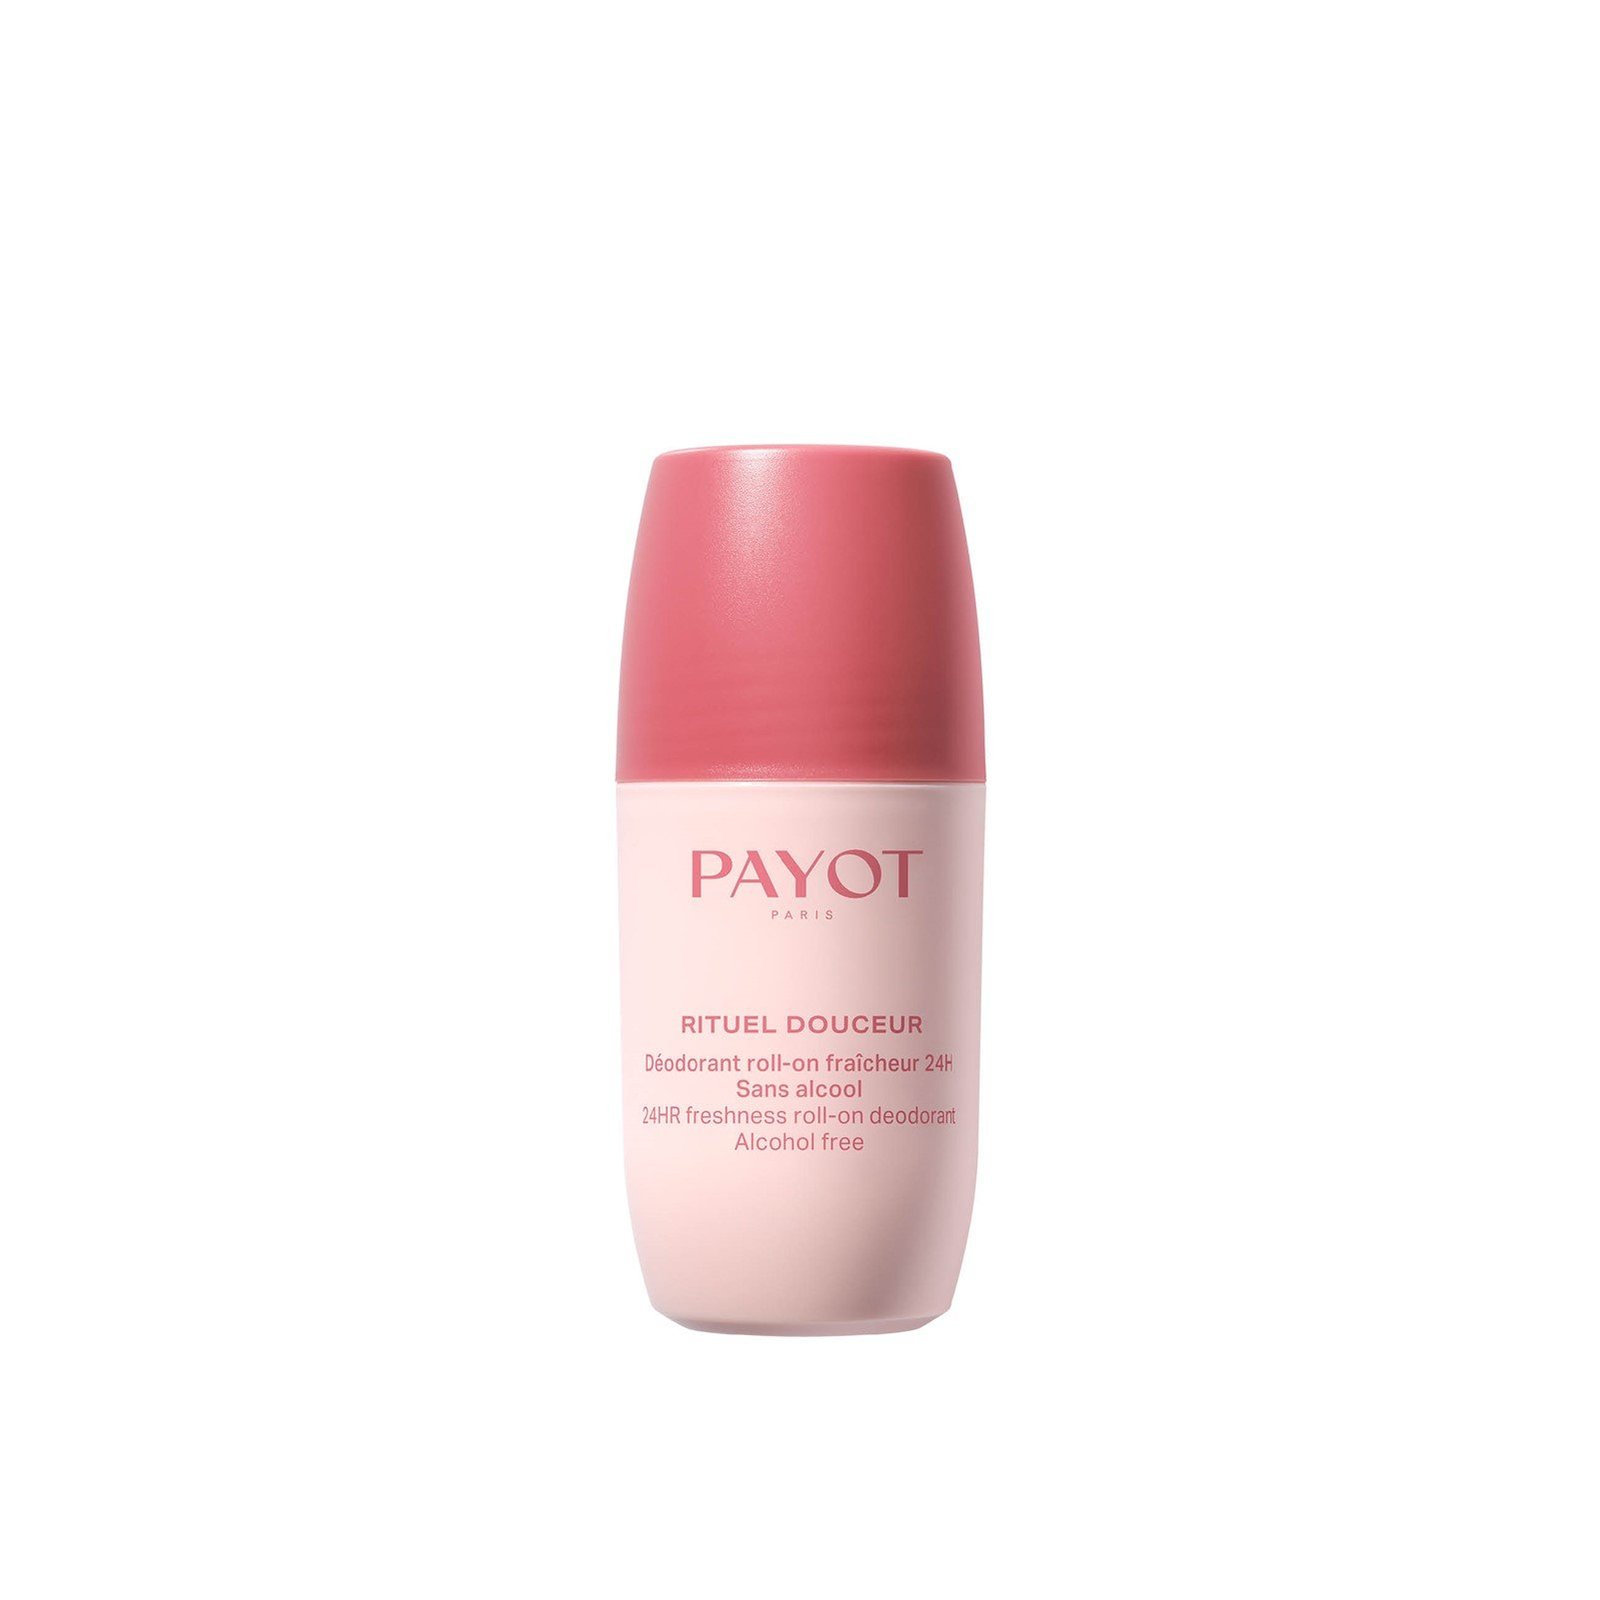 Payot Rituel Douceur 24h Freshness Roll-On Deodorant 75ml